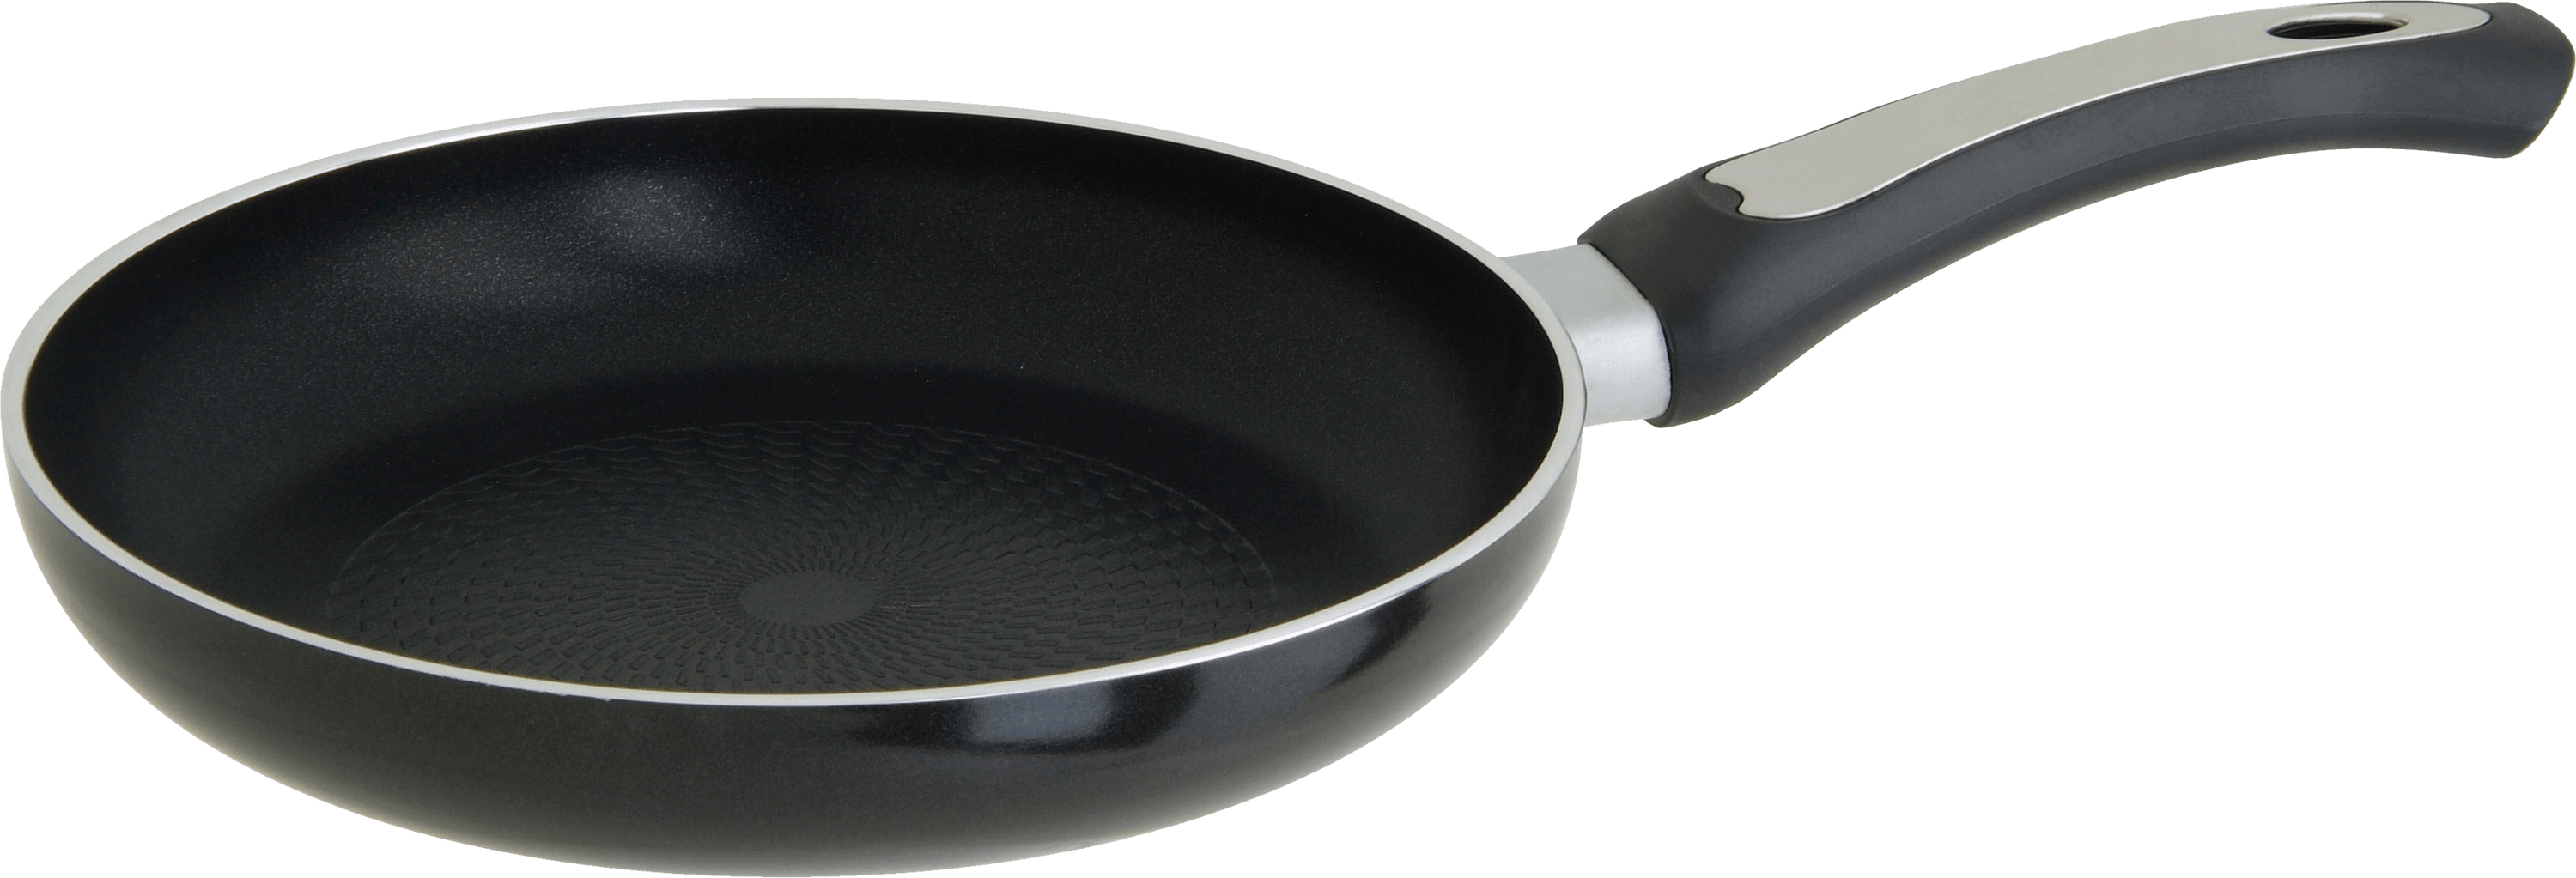 Steel Stainless Pan Frying PNG Download Free PNG Image